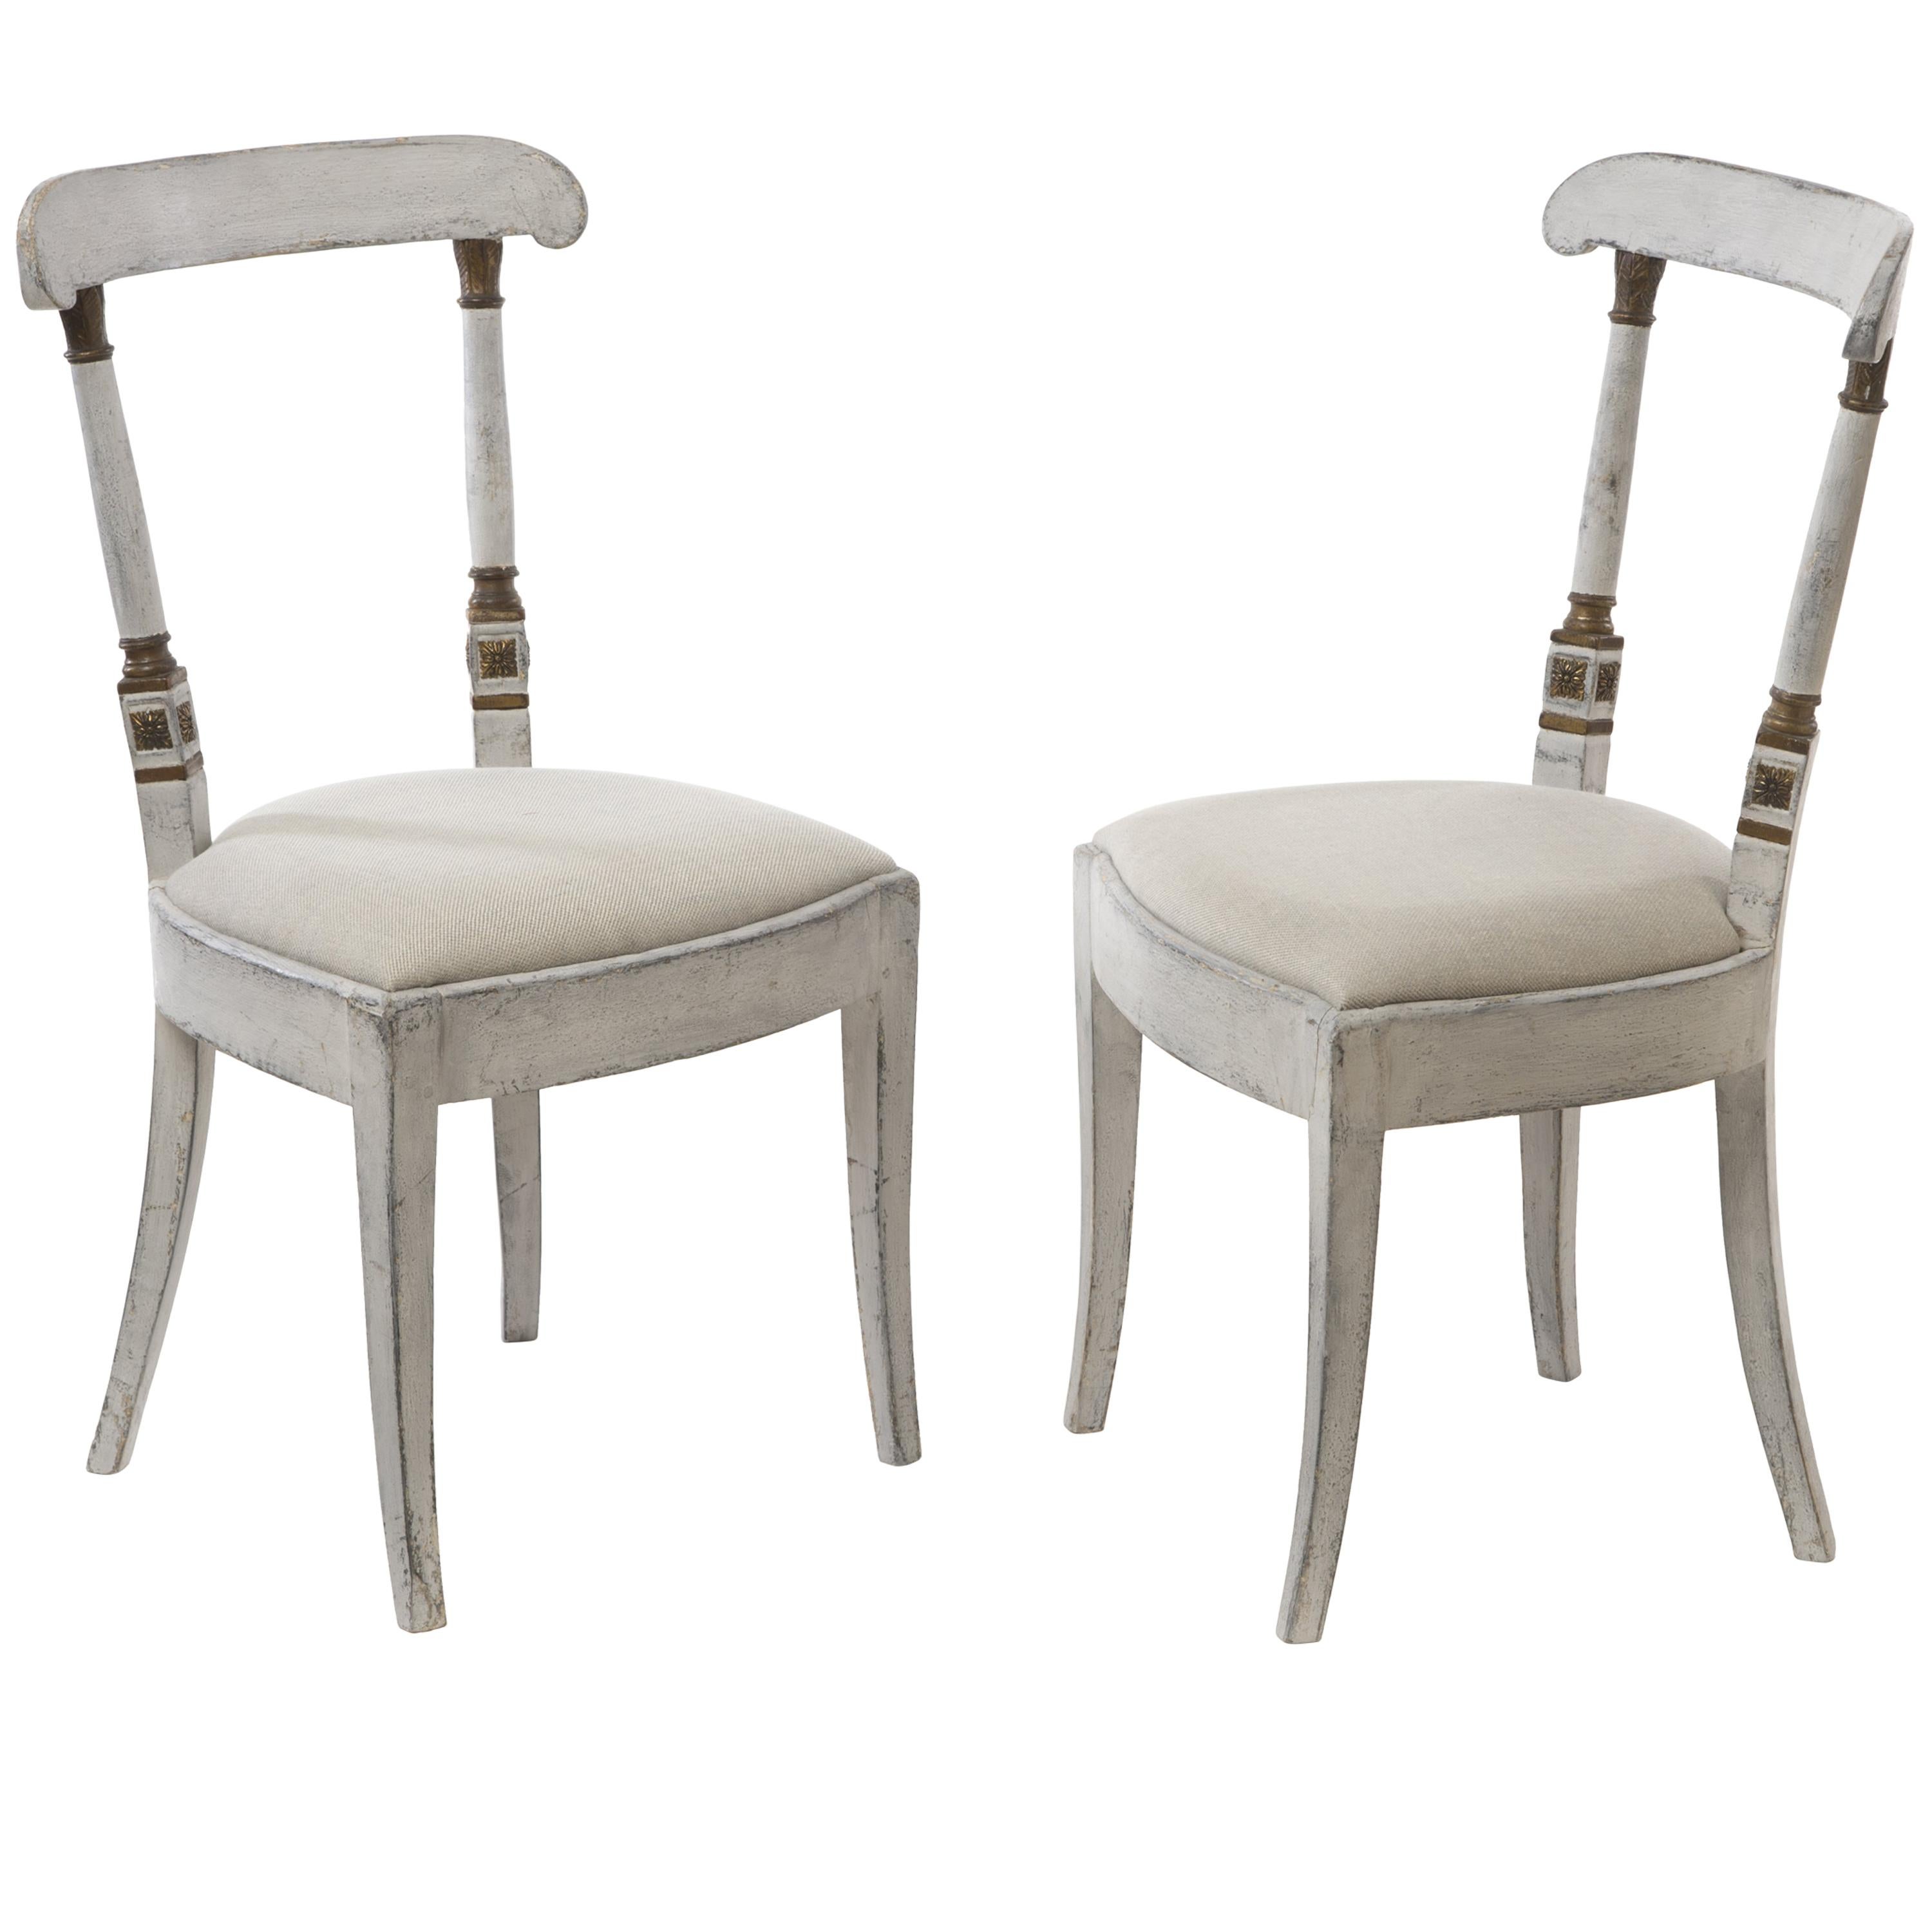 Pair of Exceptional Directoire Style Chairs